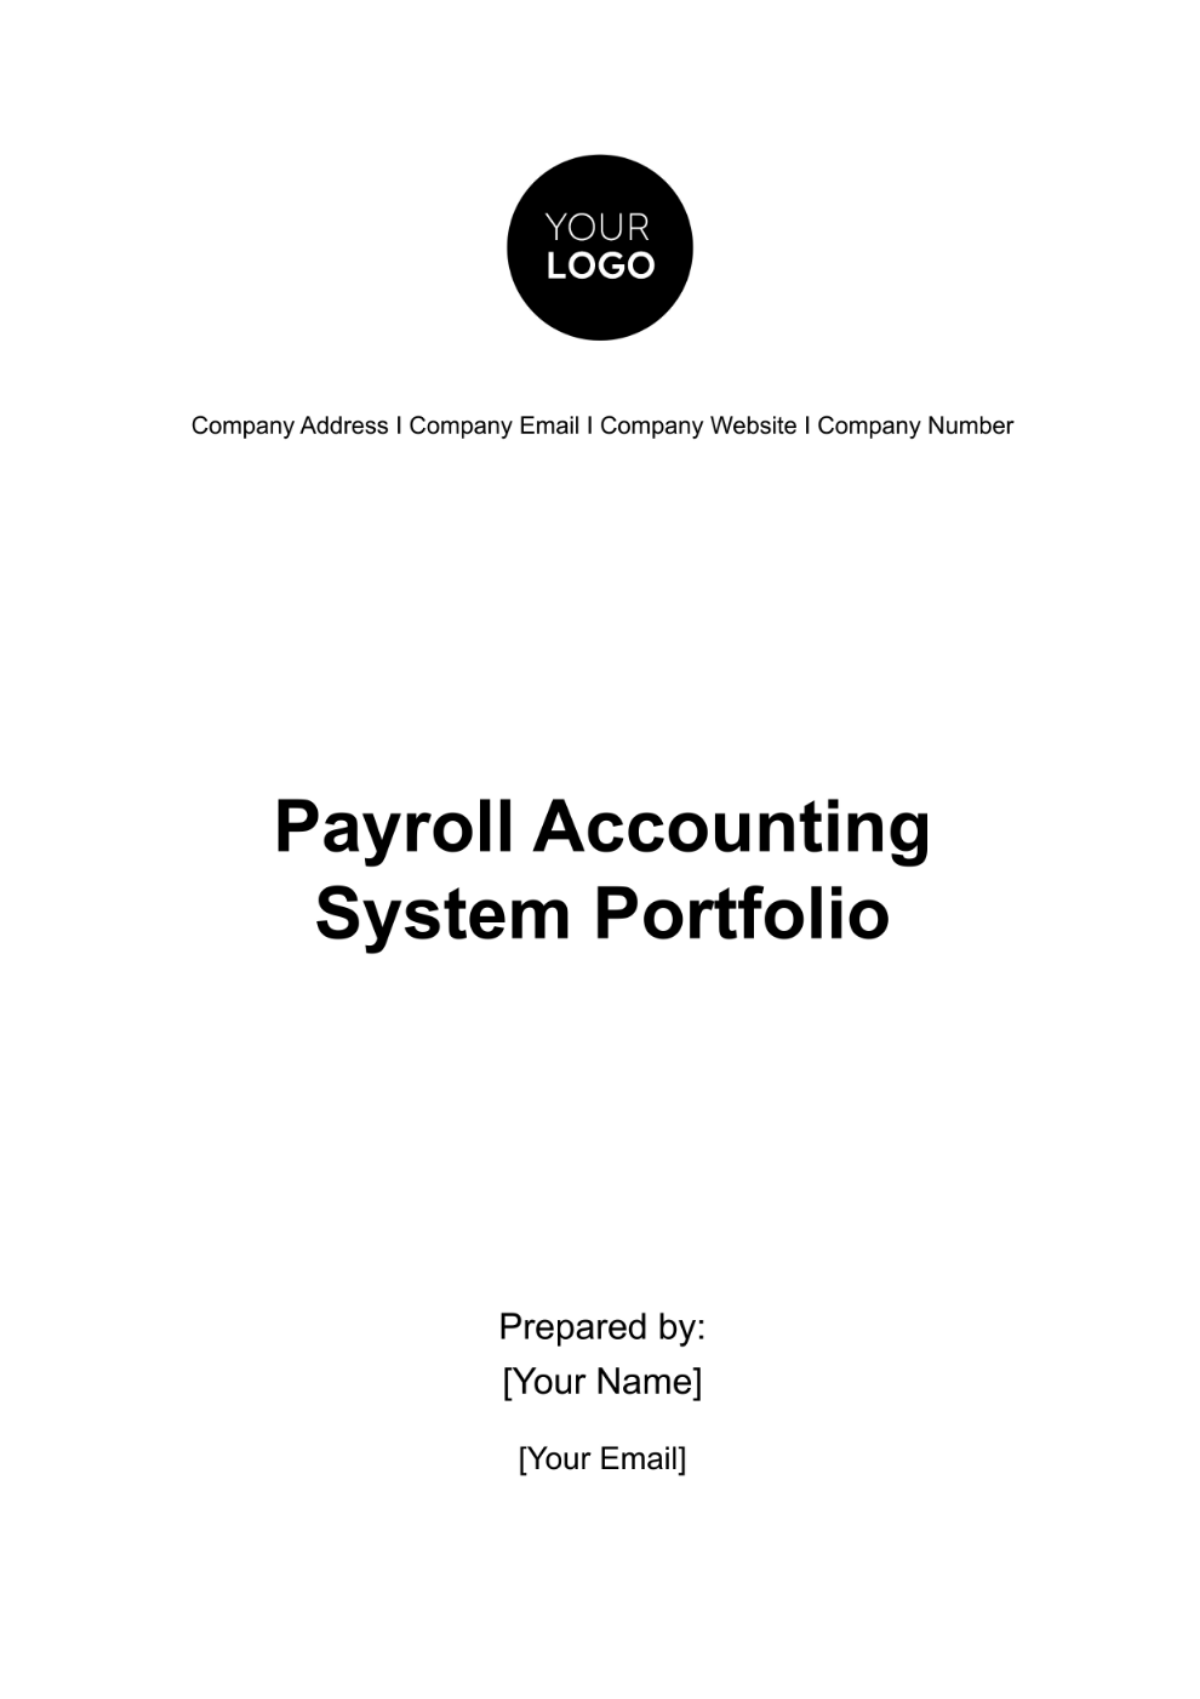 Payroll Accounting System Portfolio Template